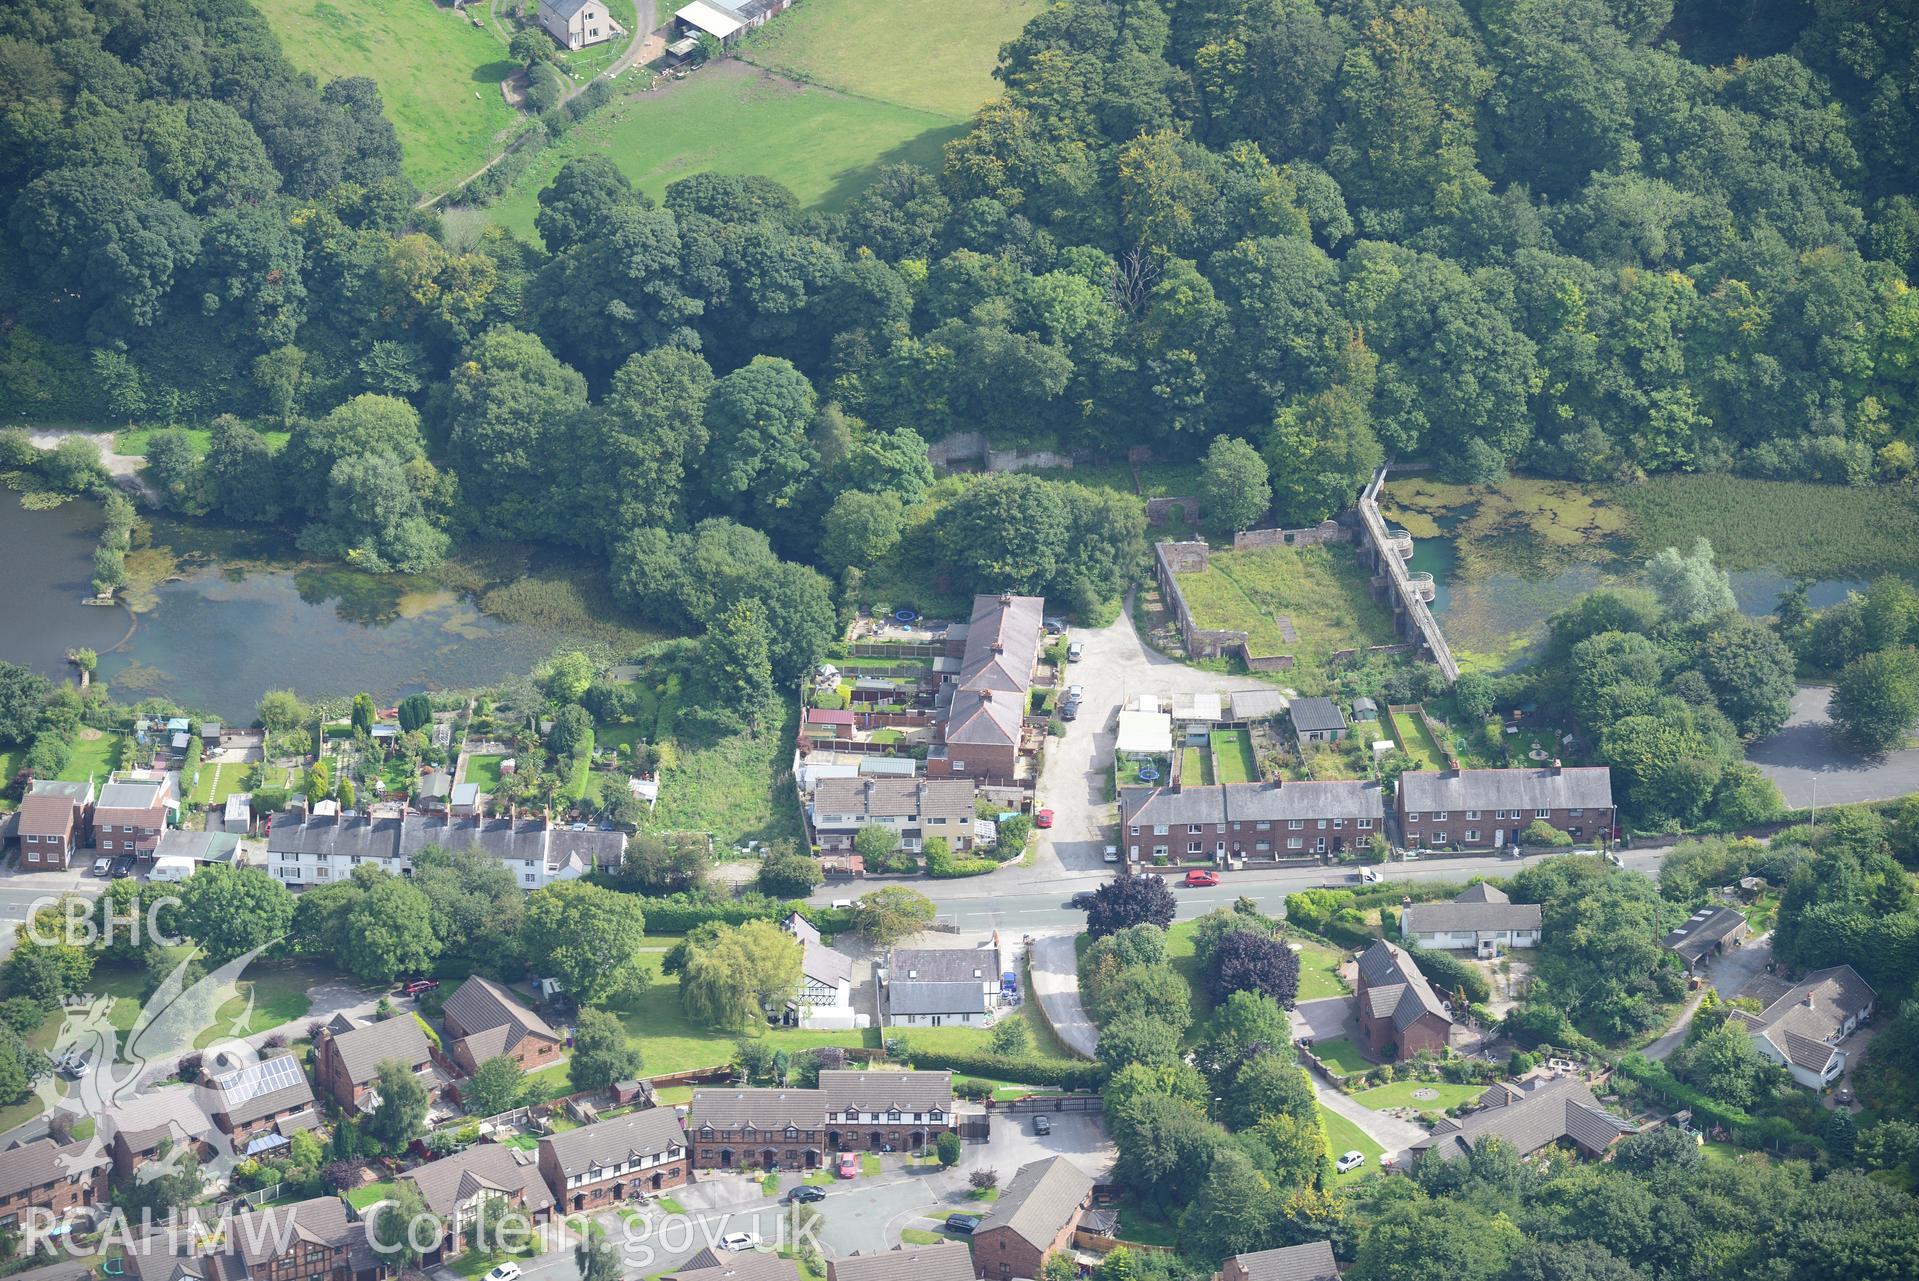 Meadow Mills, Greenfield Valley Heritage Park, Holywell. Oblique aerial photograph taken during the Royal Commission's programme of archaeological aerial reconnaissance by Toby Driver on 11th September 2015.